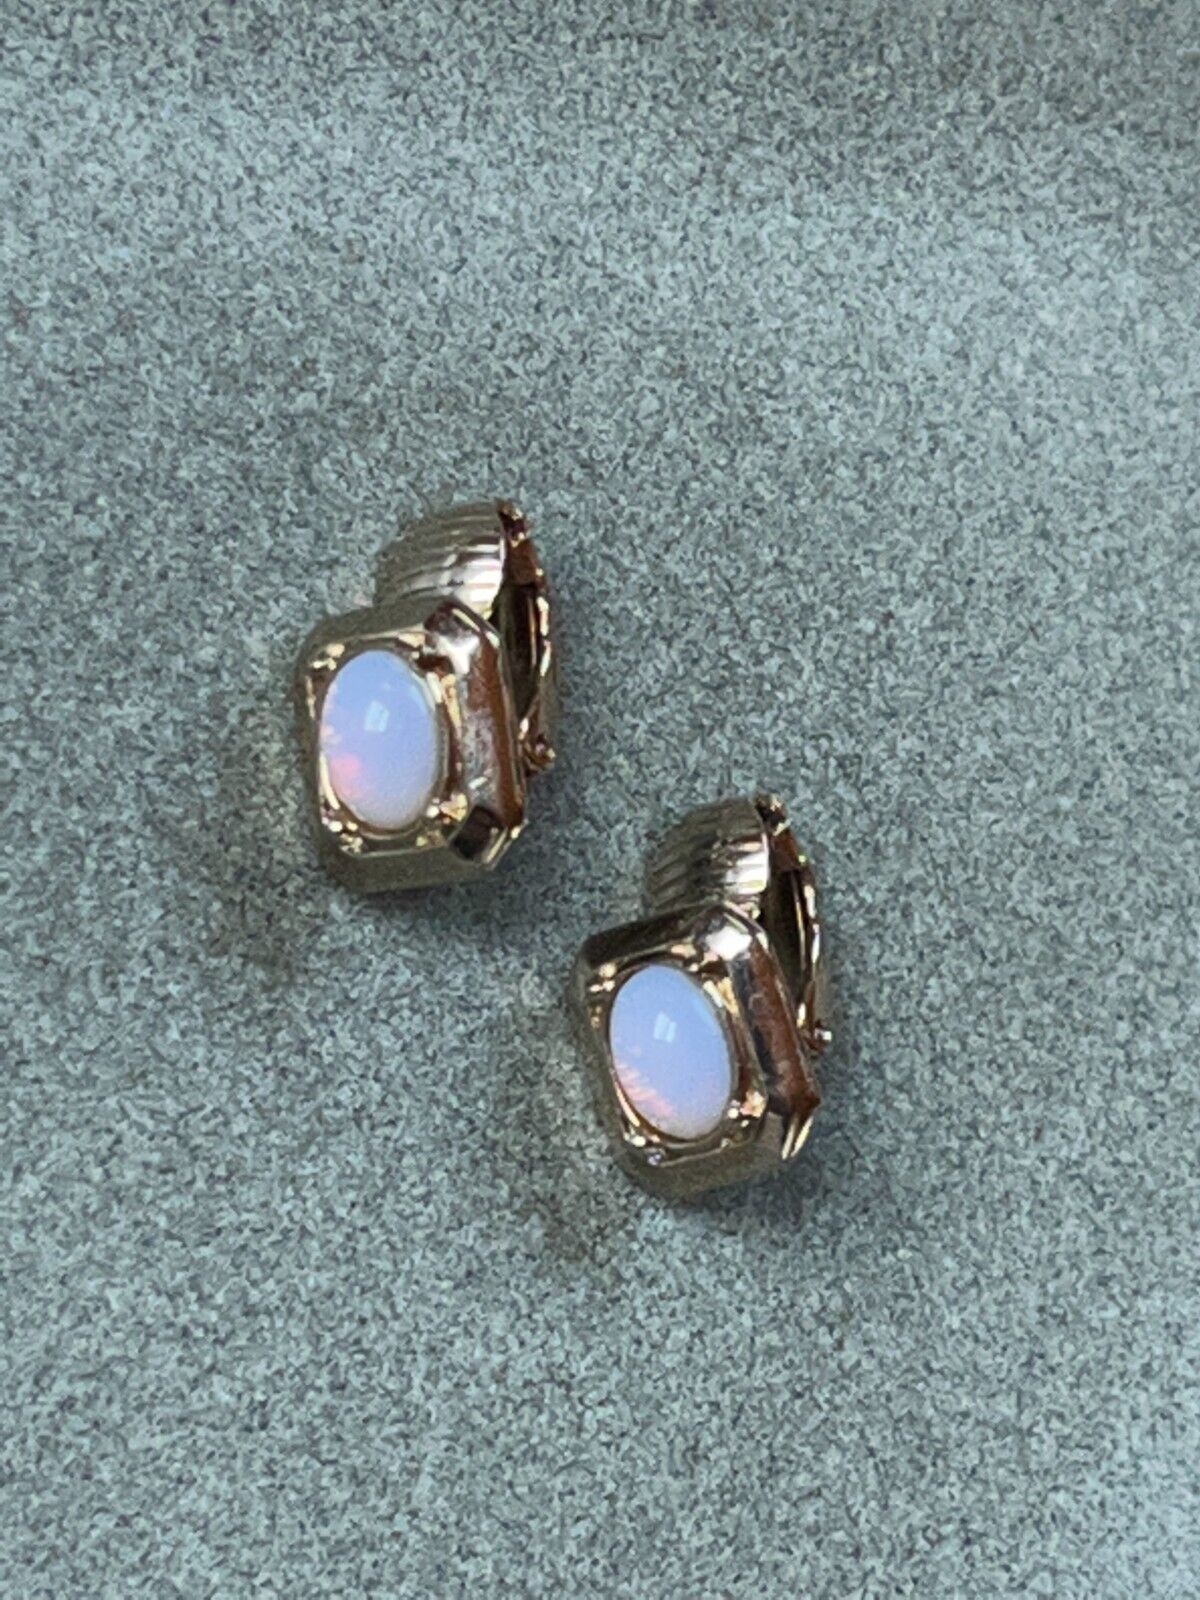 Primary image for Vintage Small Avon Marked Faux Oval Opal in Goldtone Octagon Frame Clip Earrings